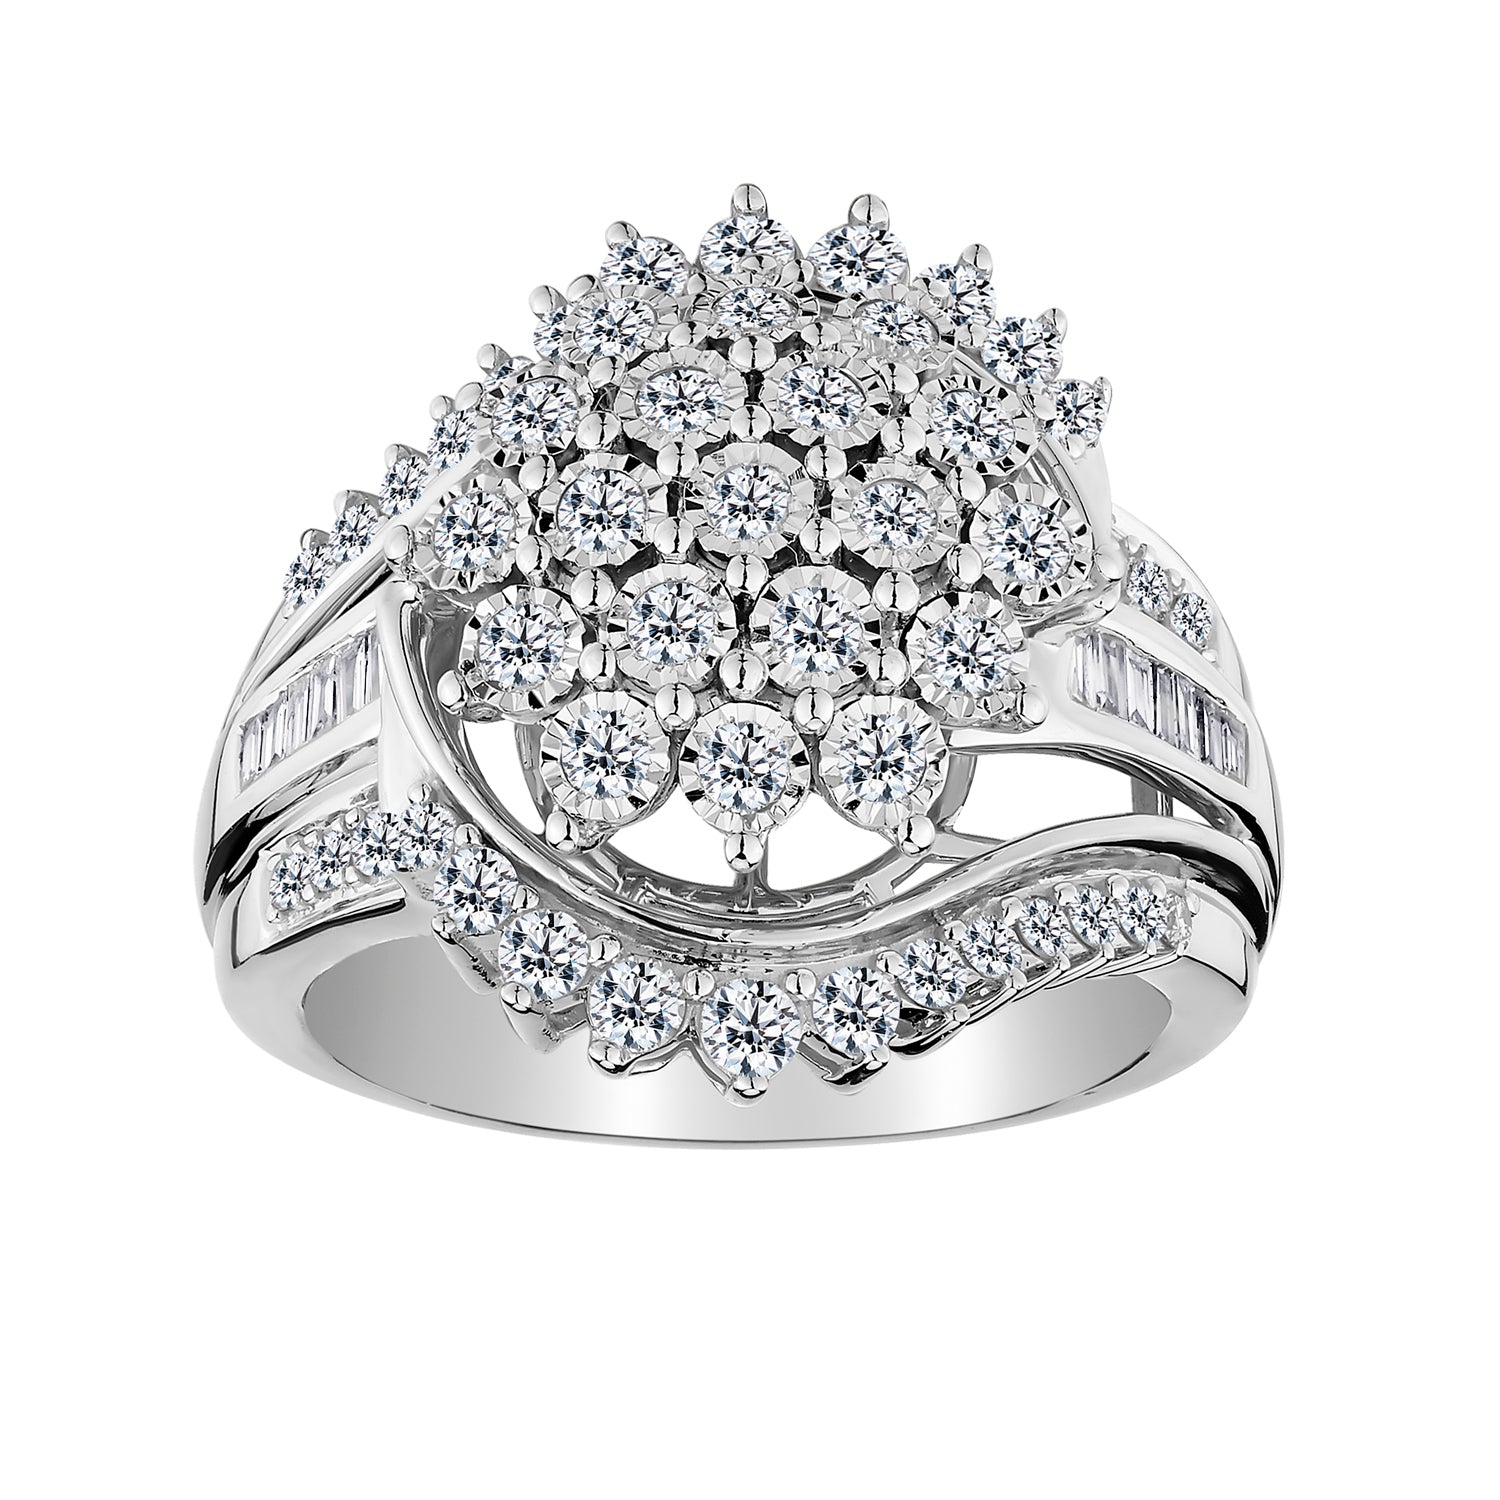 1.00 CARAT DIAMOND FLOWER RING, 10kt WHITE GOLD.......................NOW - Griffin Jewellery Designs